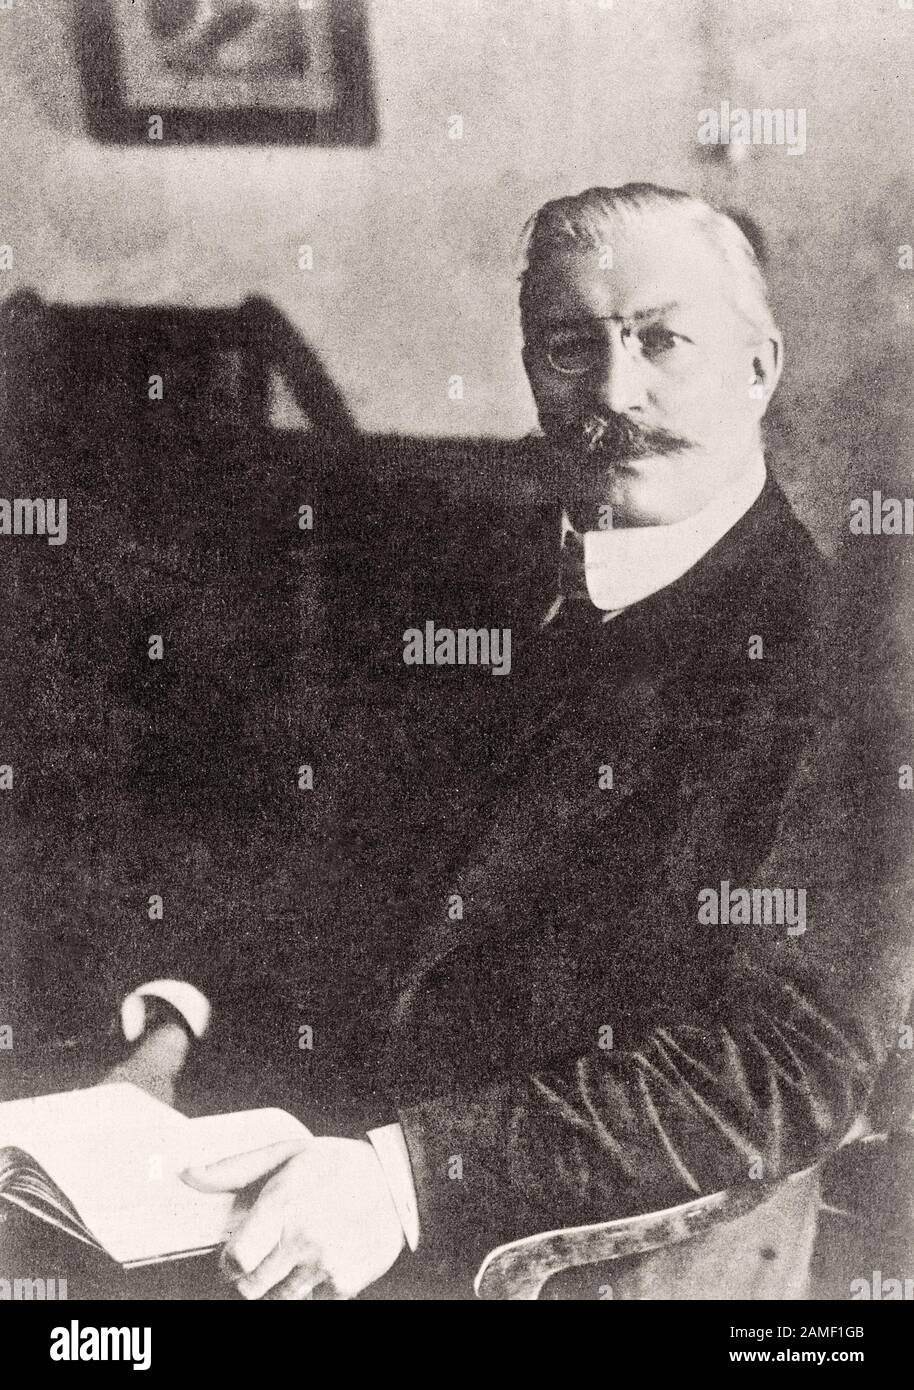 Pavel Nikolayevich Milyukov (Milikoff) ( 1859 - 1943) was a Russian historian and liberal politician. Milyukov was the founder, leader, and the most p Stock Photo